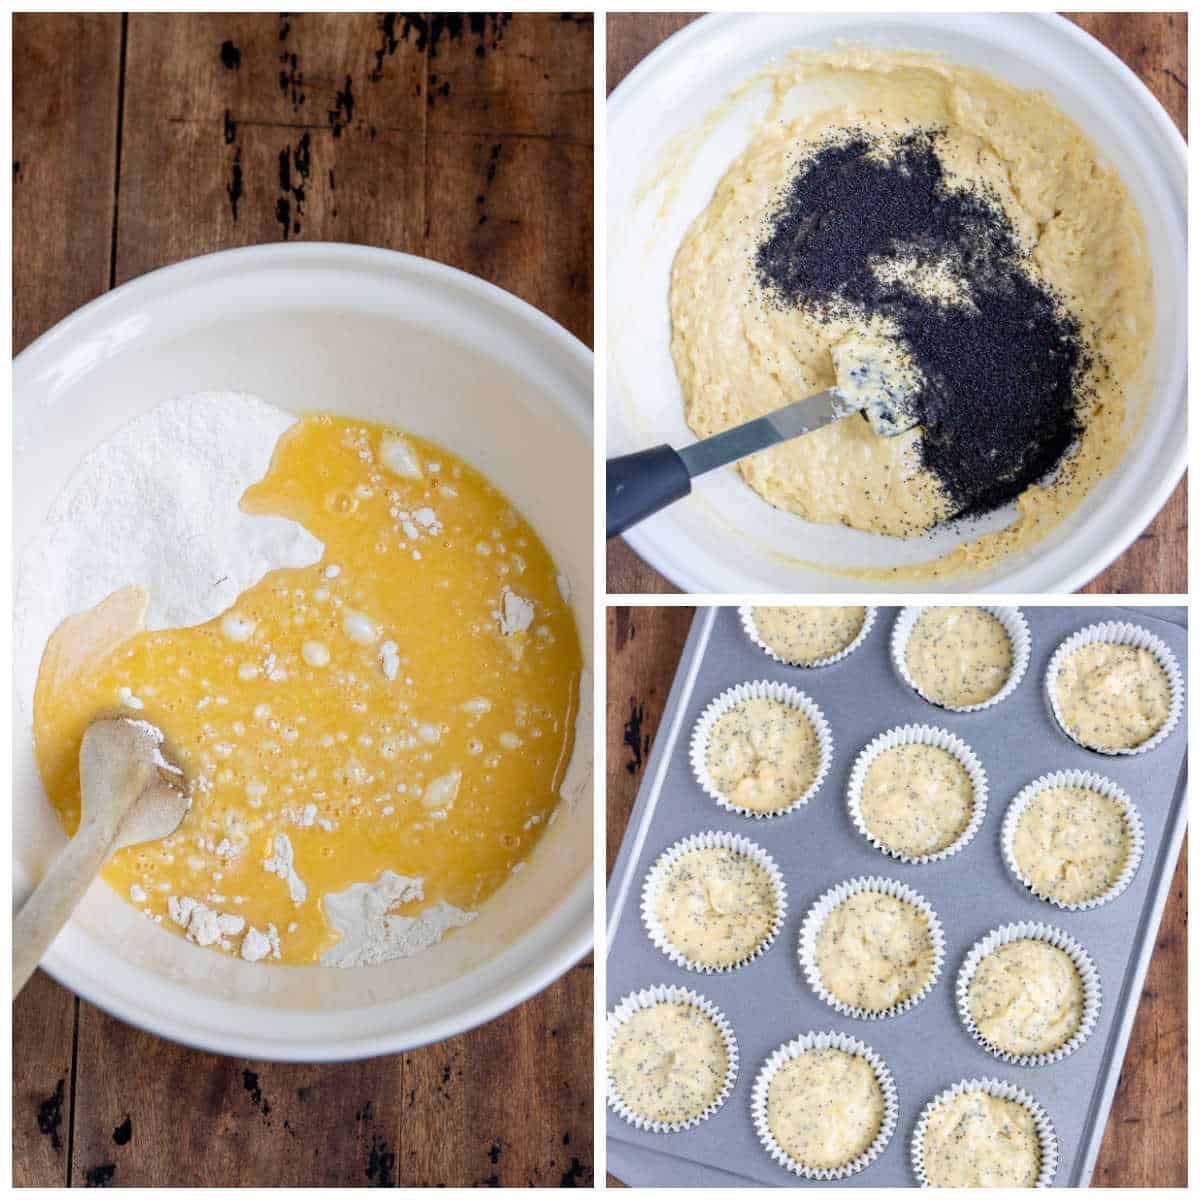 Mixing batter and filling muffin pan.